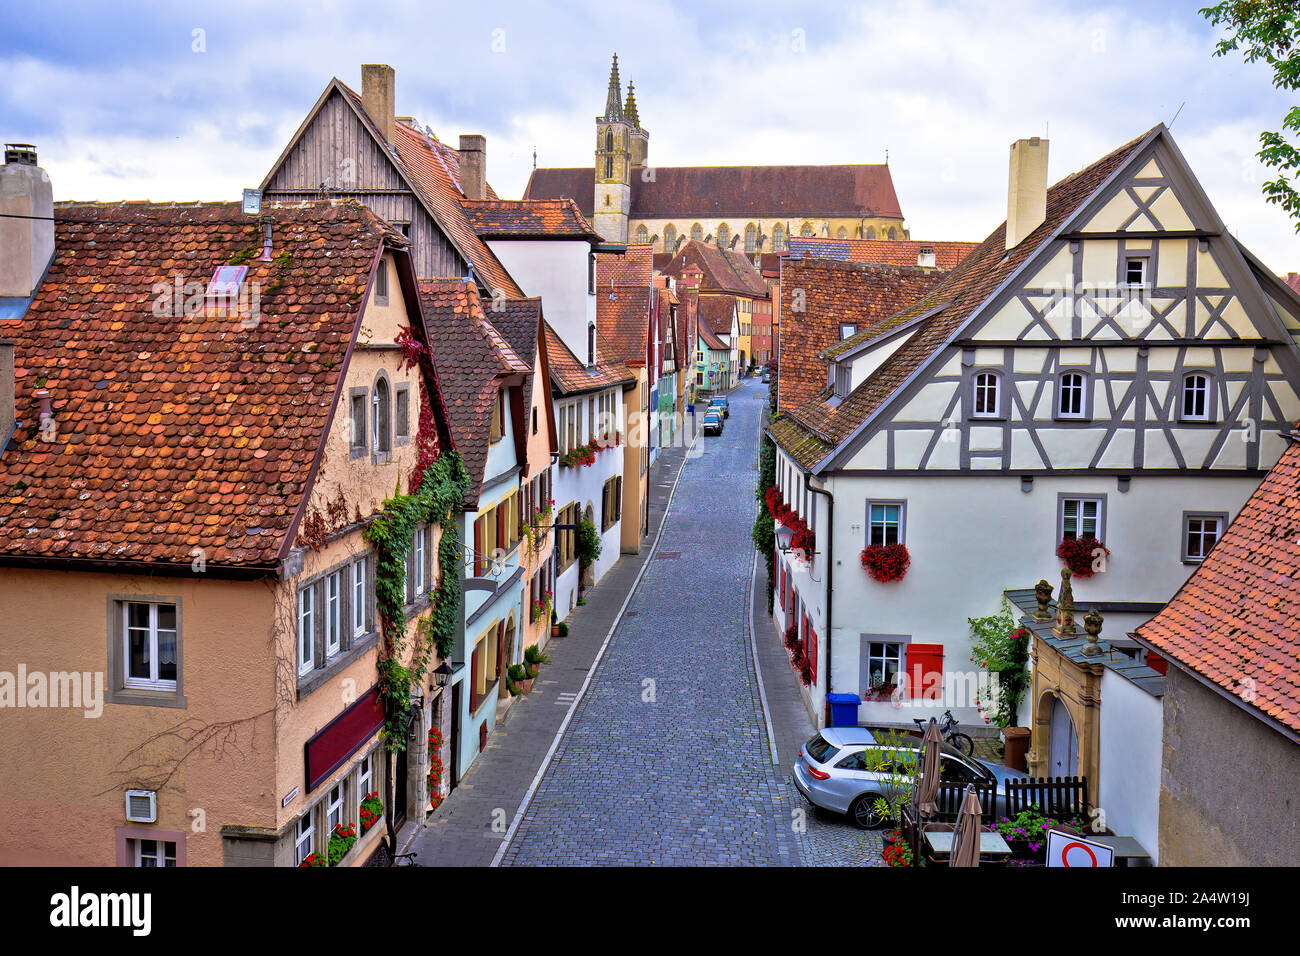 Colorful cobbled street of historic town of Rothenburg ob der Tauber view, Romantic road of Bavaria region of Germany Stock Photo